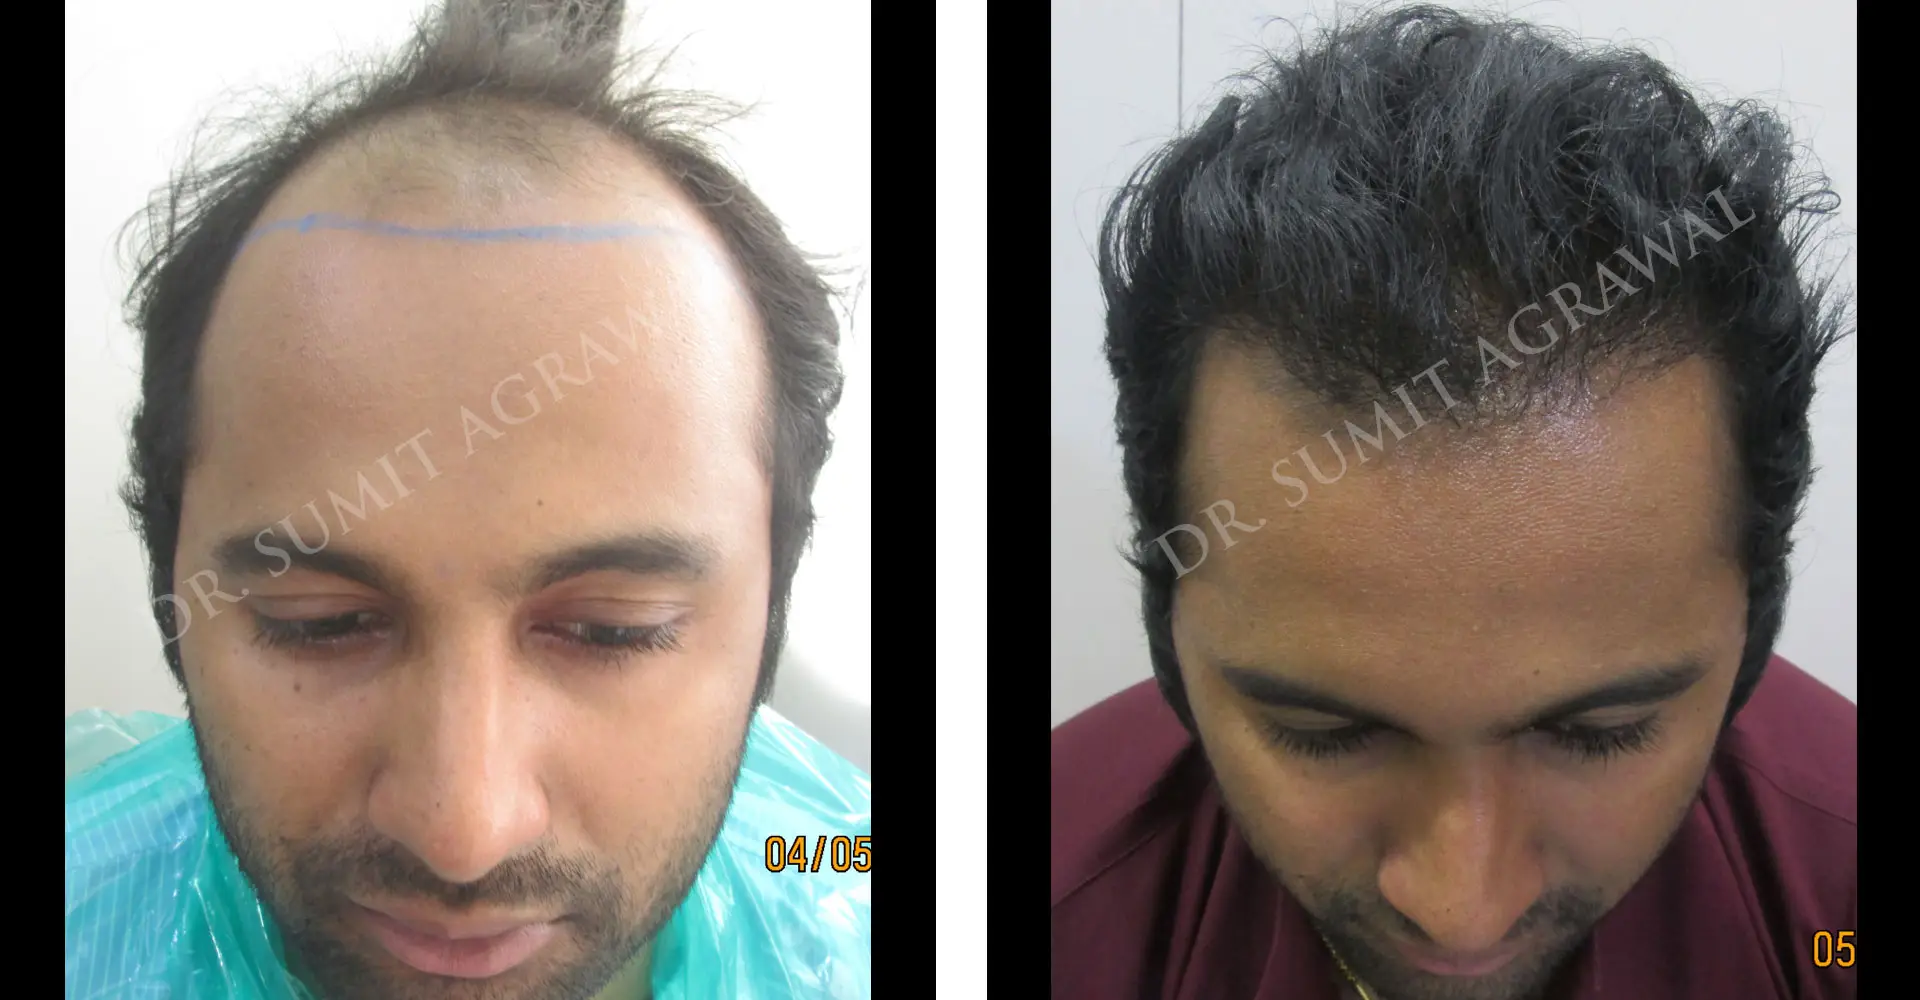 View Fut Hair Transplant Before and After photos of successful results by Dr. Sumit Agrawal.